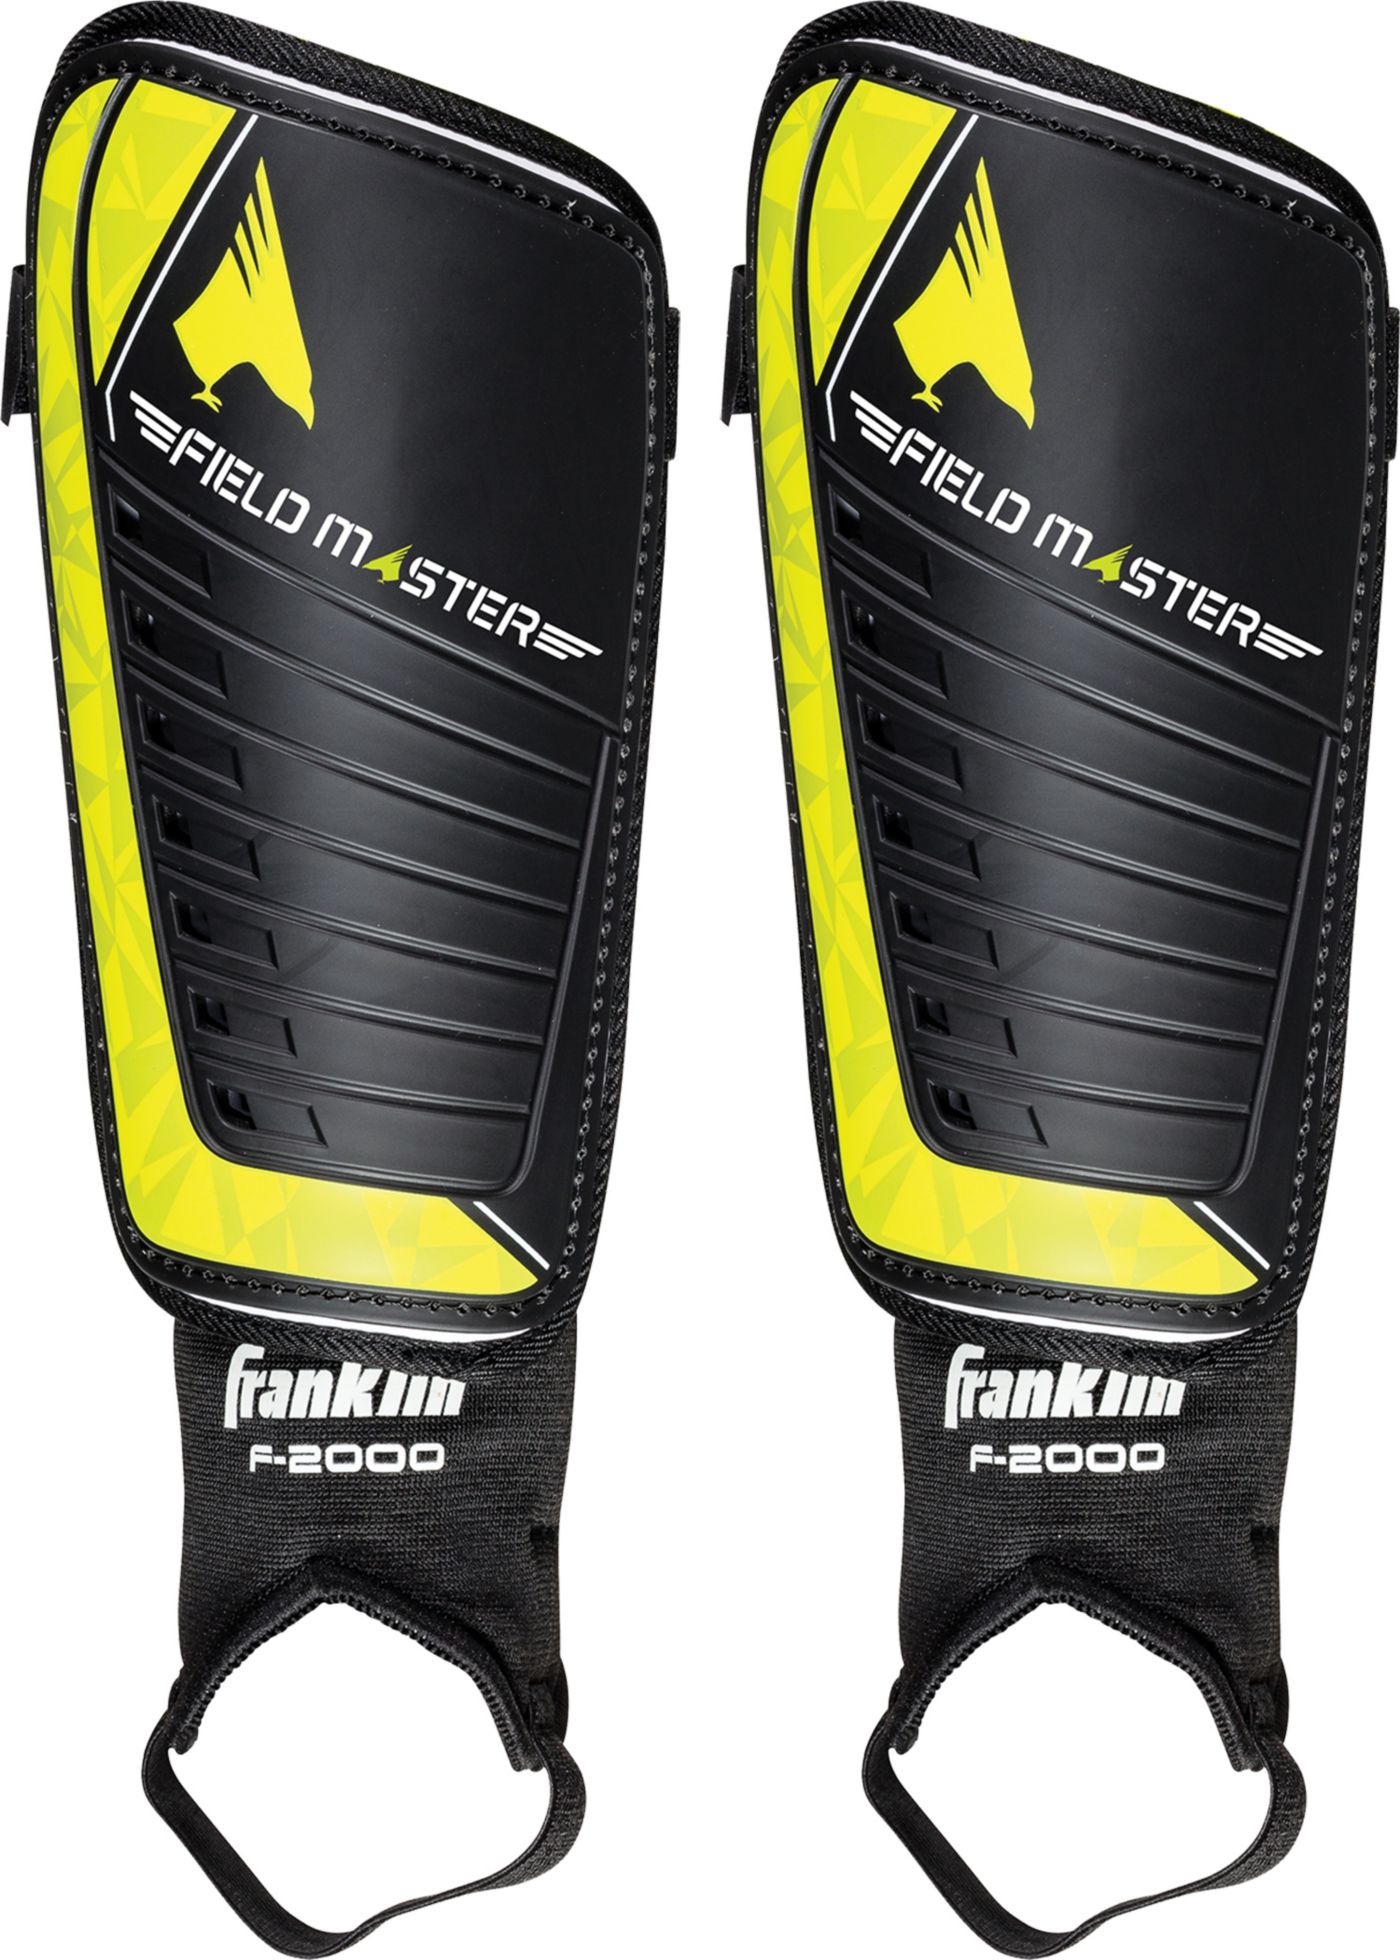 Download Franklin Adult Field Master Soccer Shin Guards | DICK'S ...